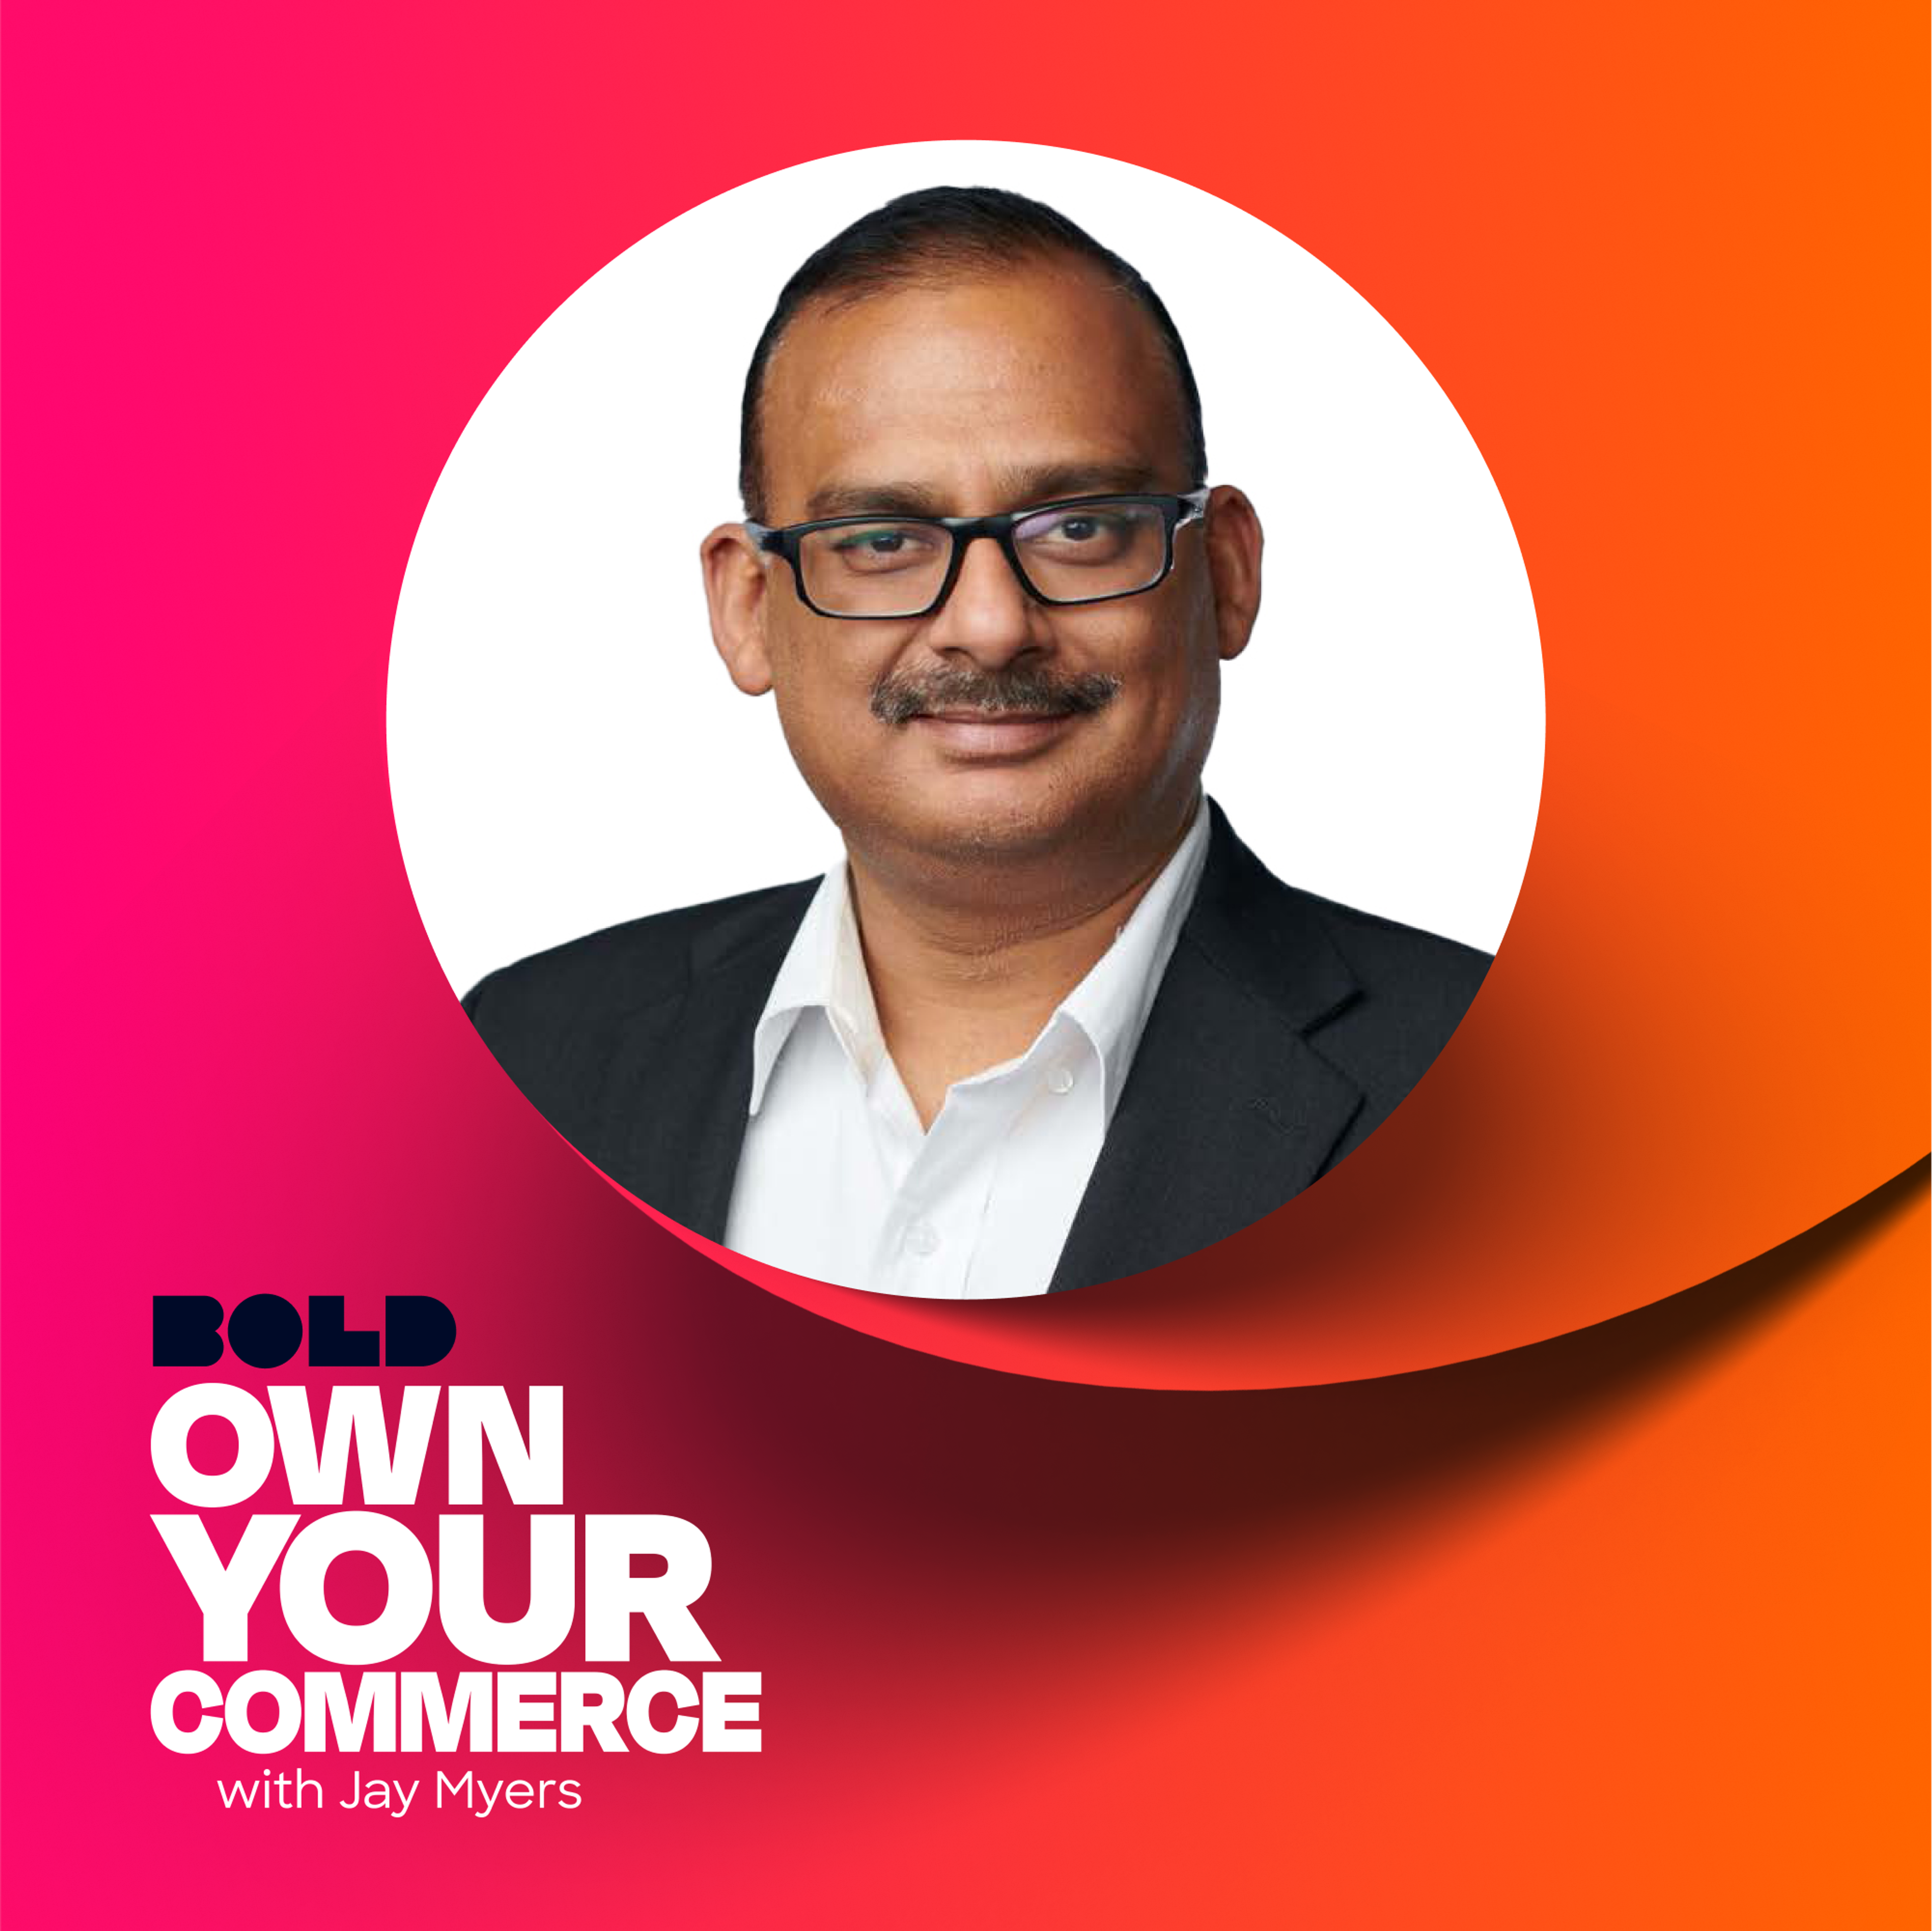 Deepak Jain: The Checkout Trifecta: Speed, Security and Conversion. Wink promises all three!